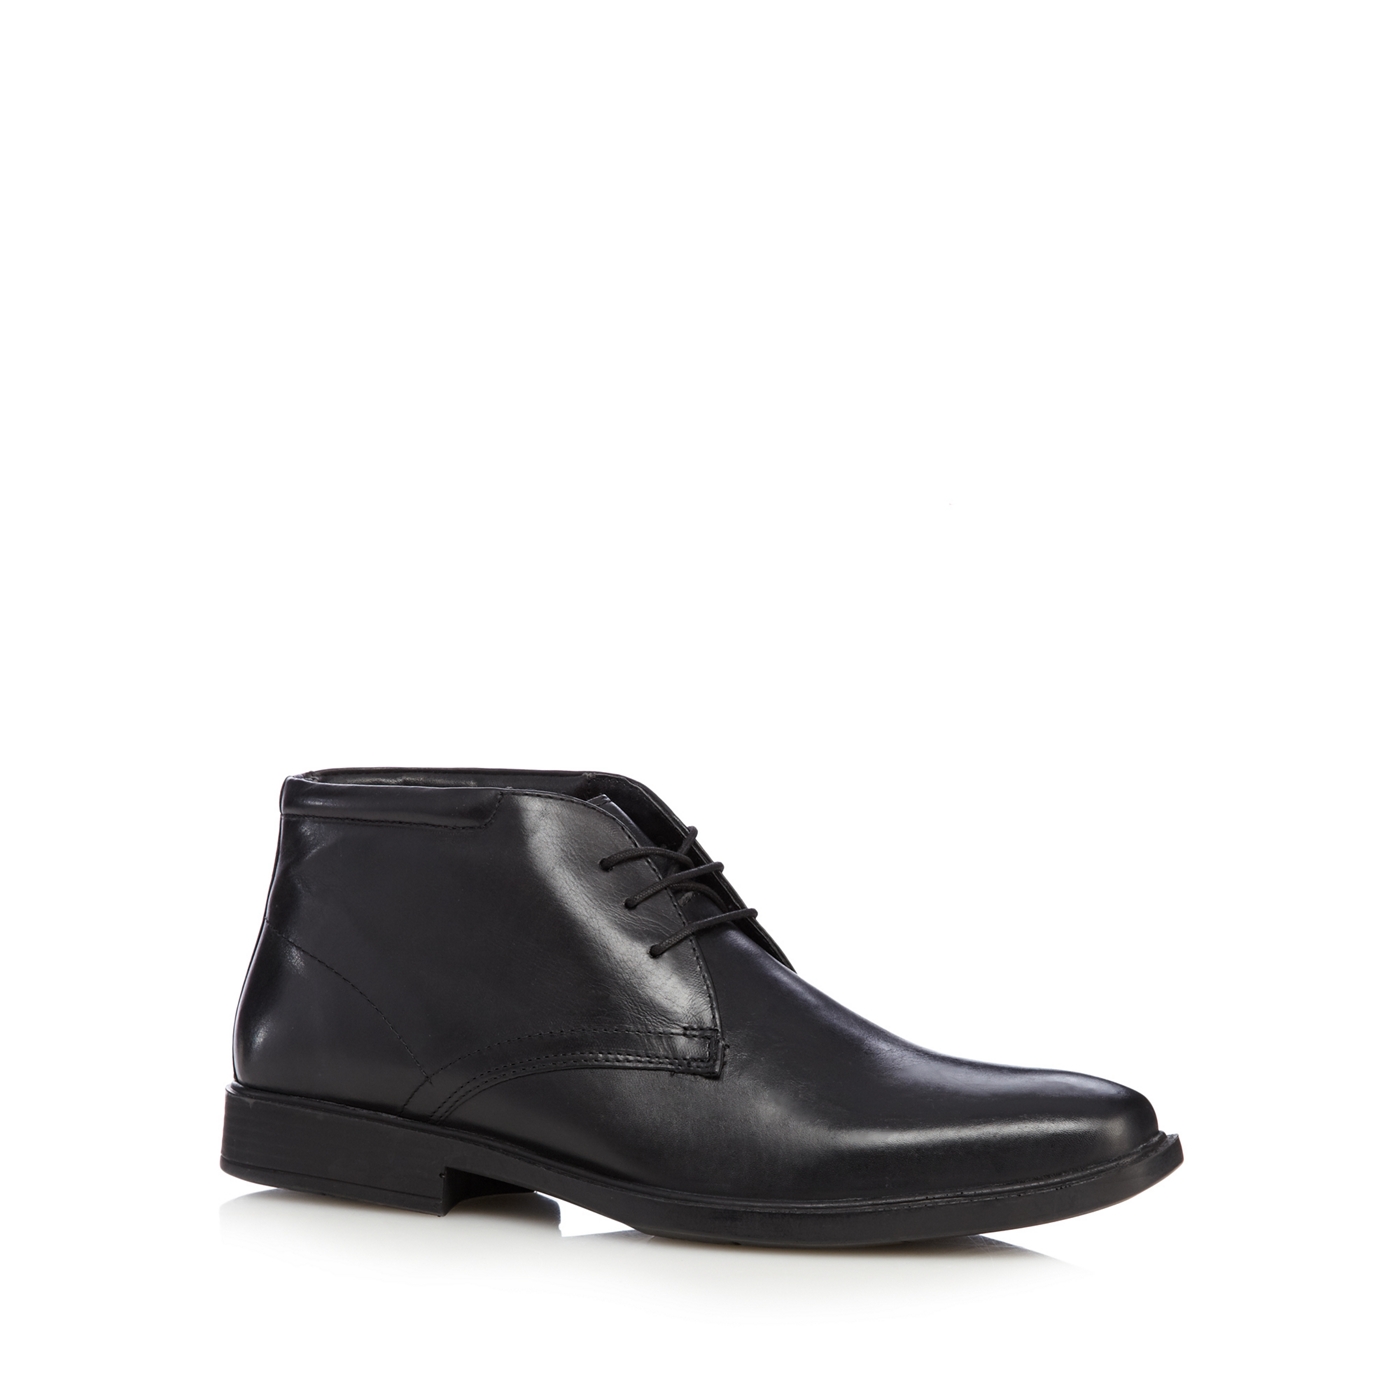 Henley Wide fit black leather chukka boots